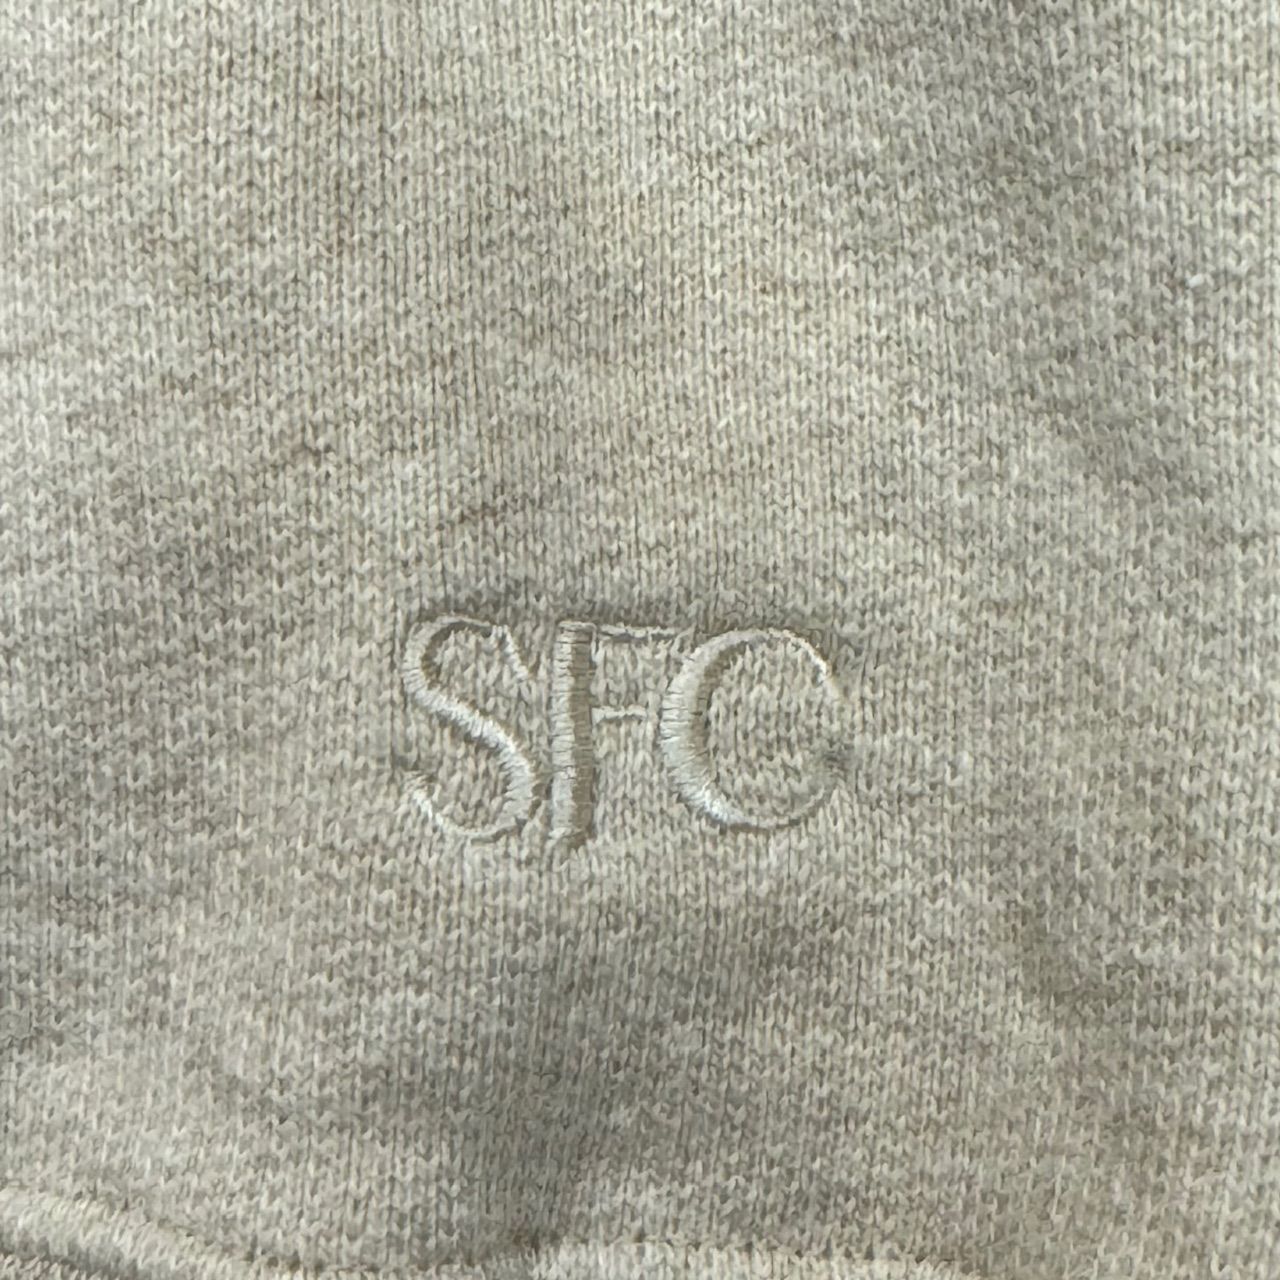 S.F.C 23AW PULLOVER HOODIE約77cm